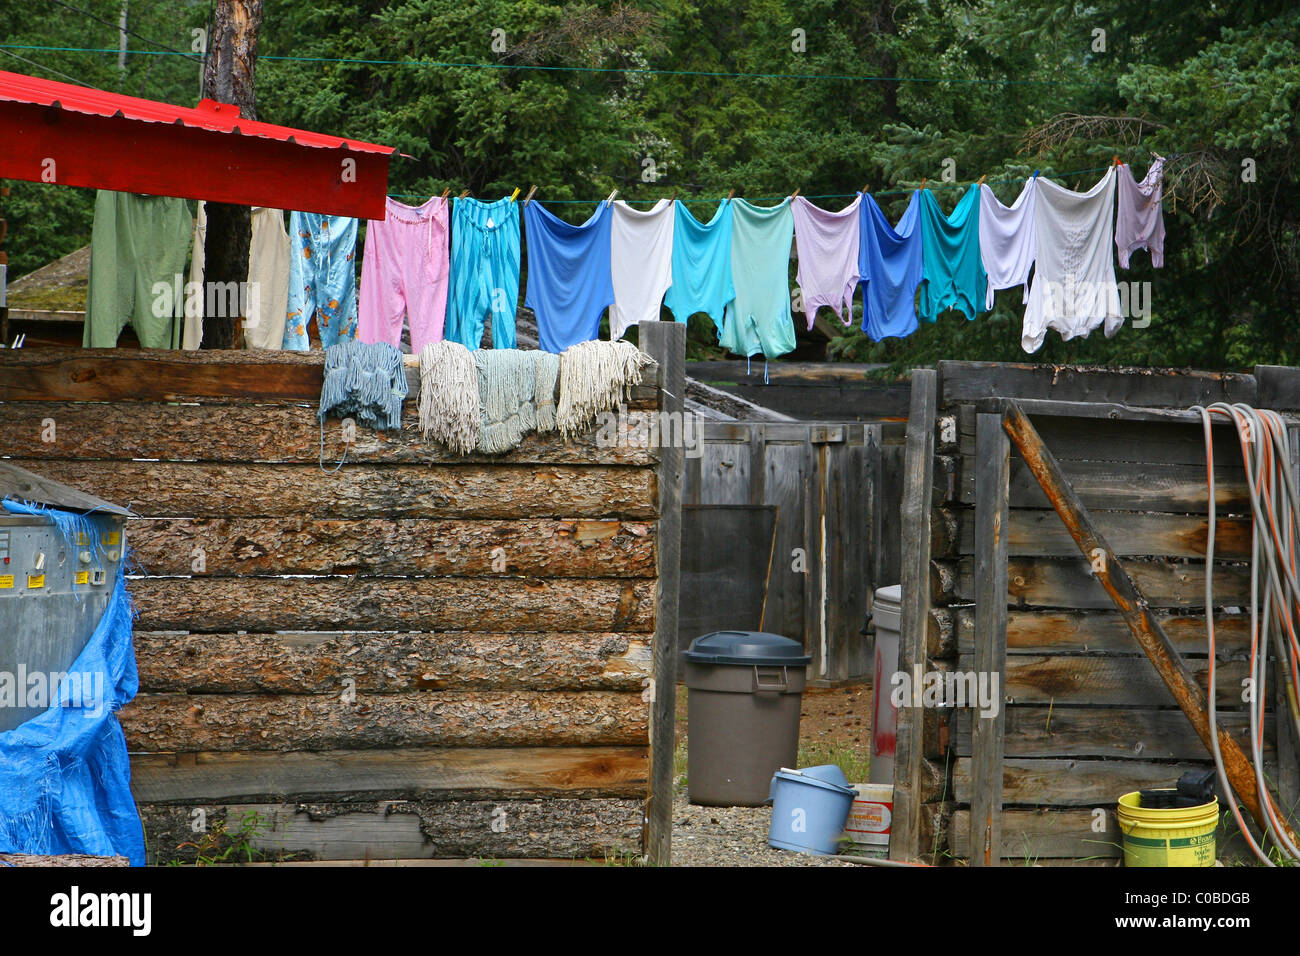 Laundry day.  Hung out to dry. Stock Photo